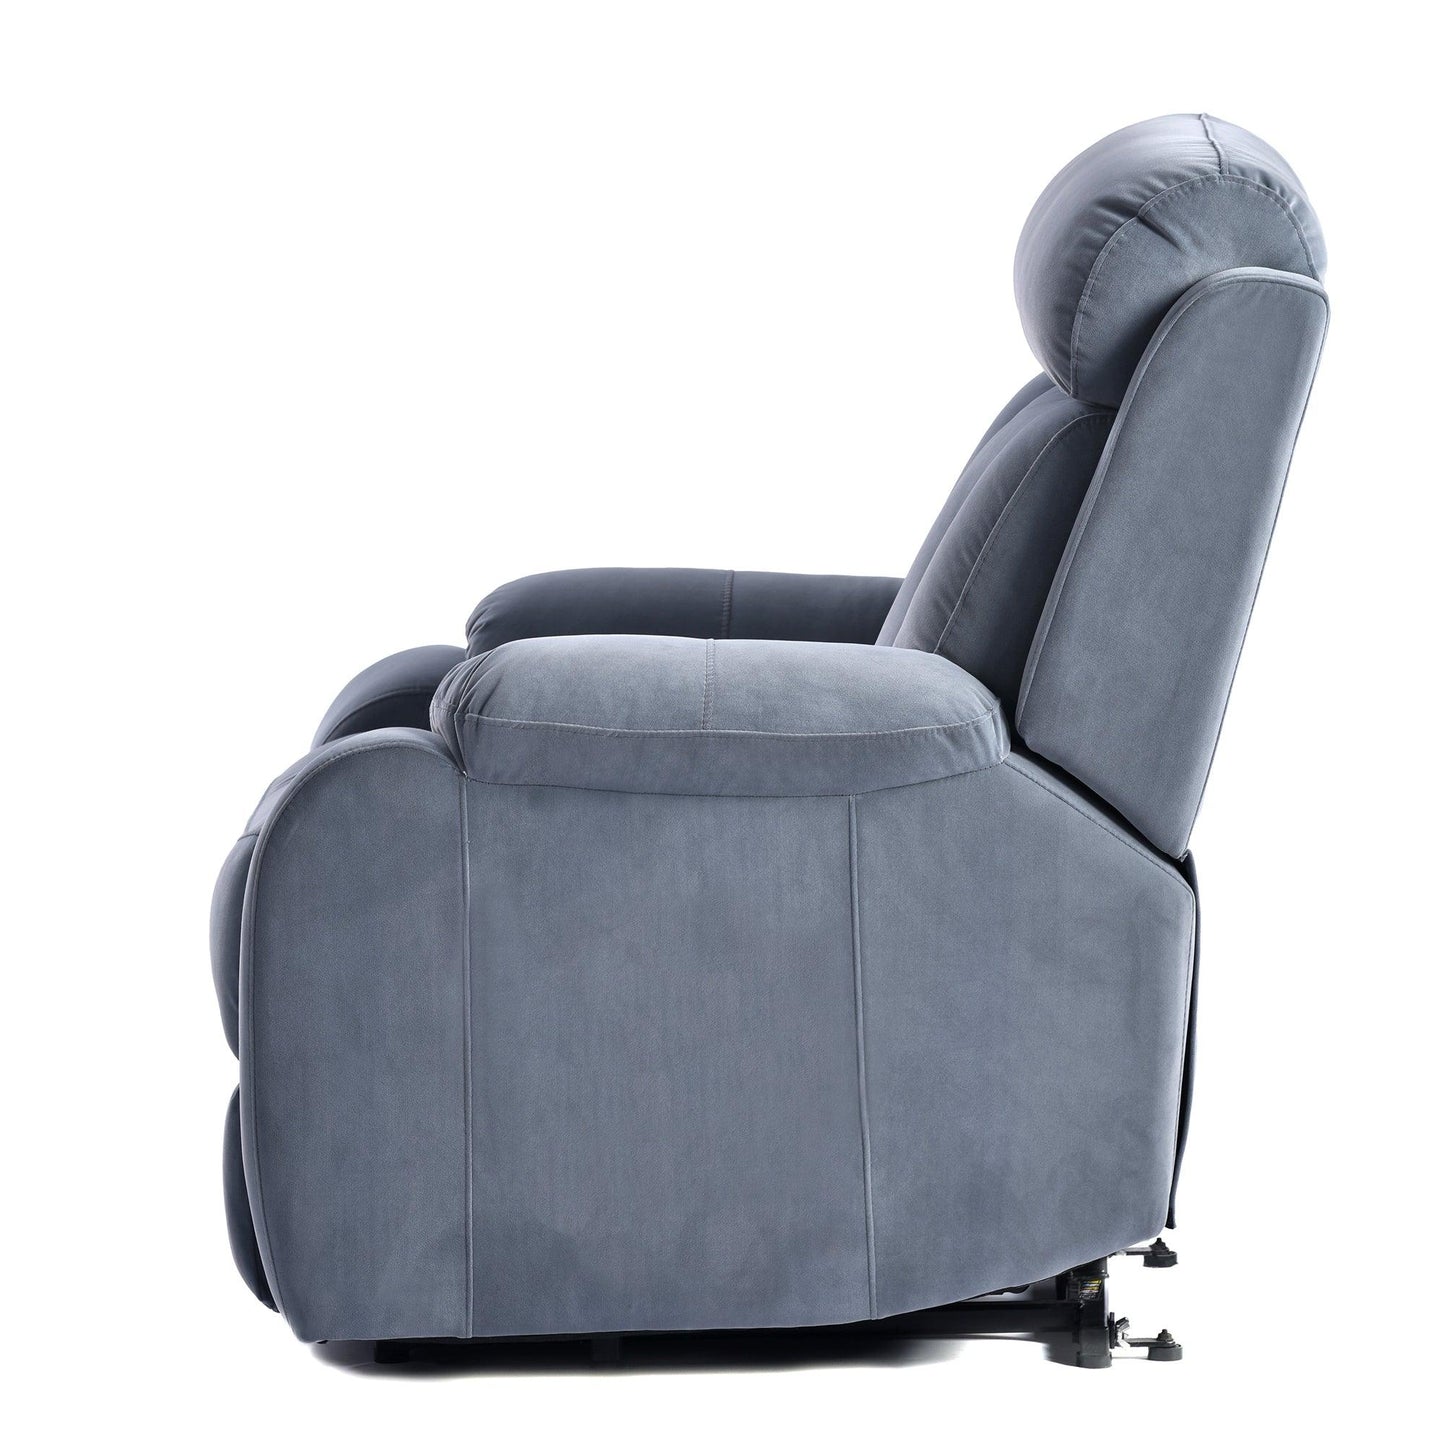 Luxury Lift Chair Recliner with Power Lift Assistance, Adjustable Angles, and Anti-Skid Stability, Light Blue FredCo